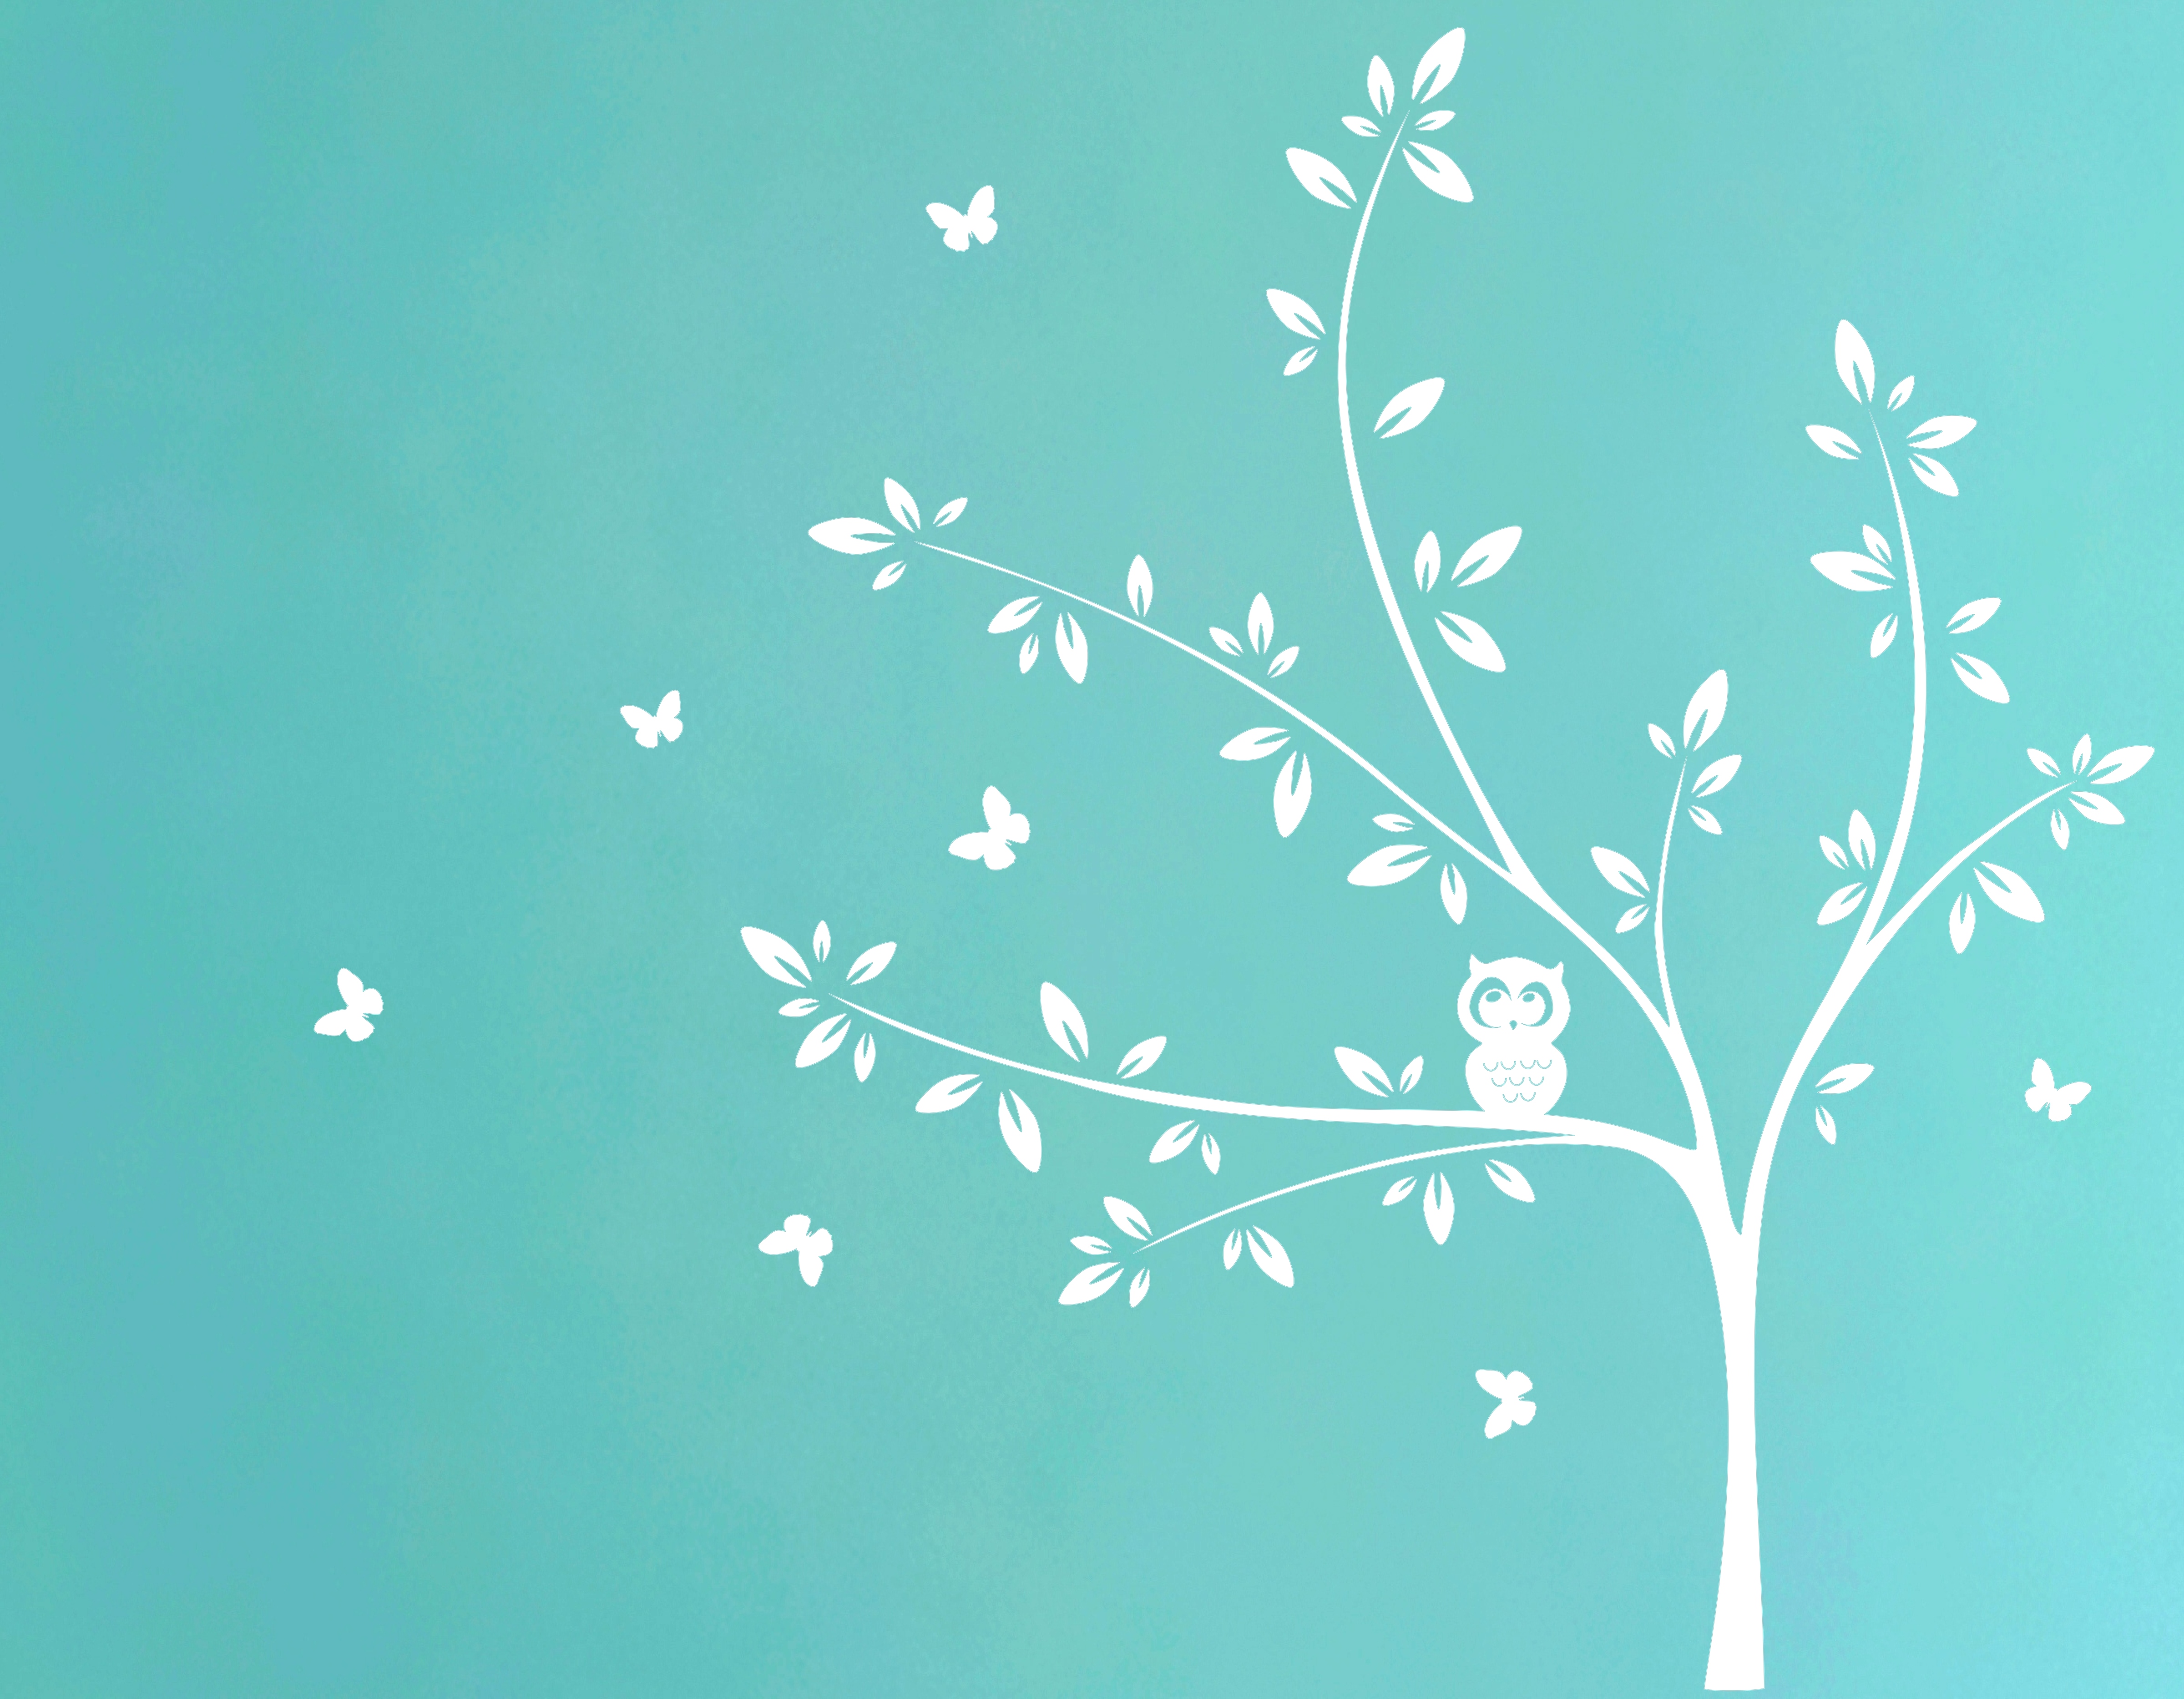 Tree Wall Decal with Butterflies and Cute Owl